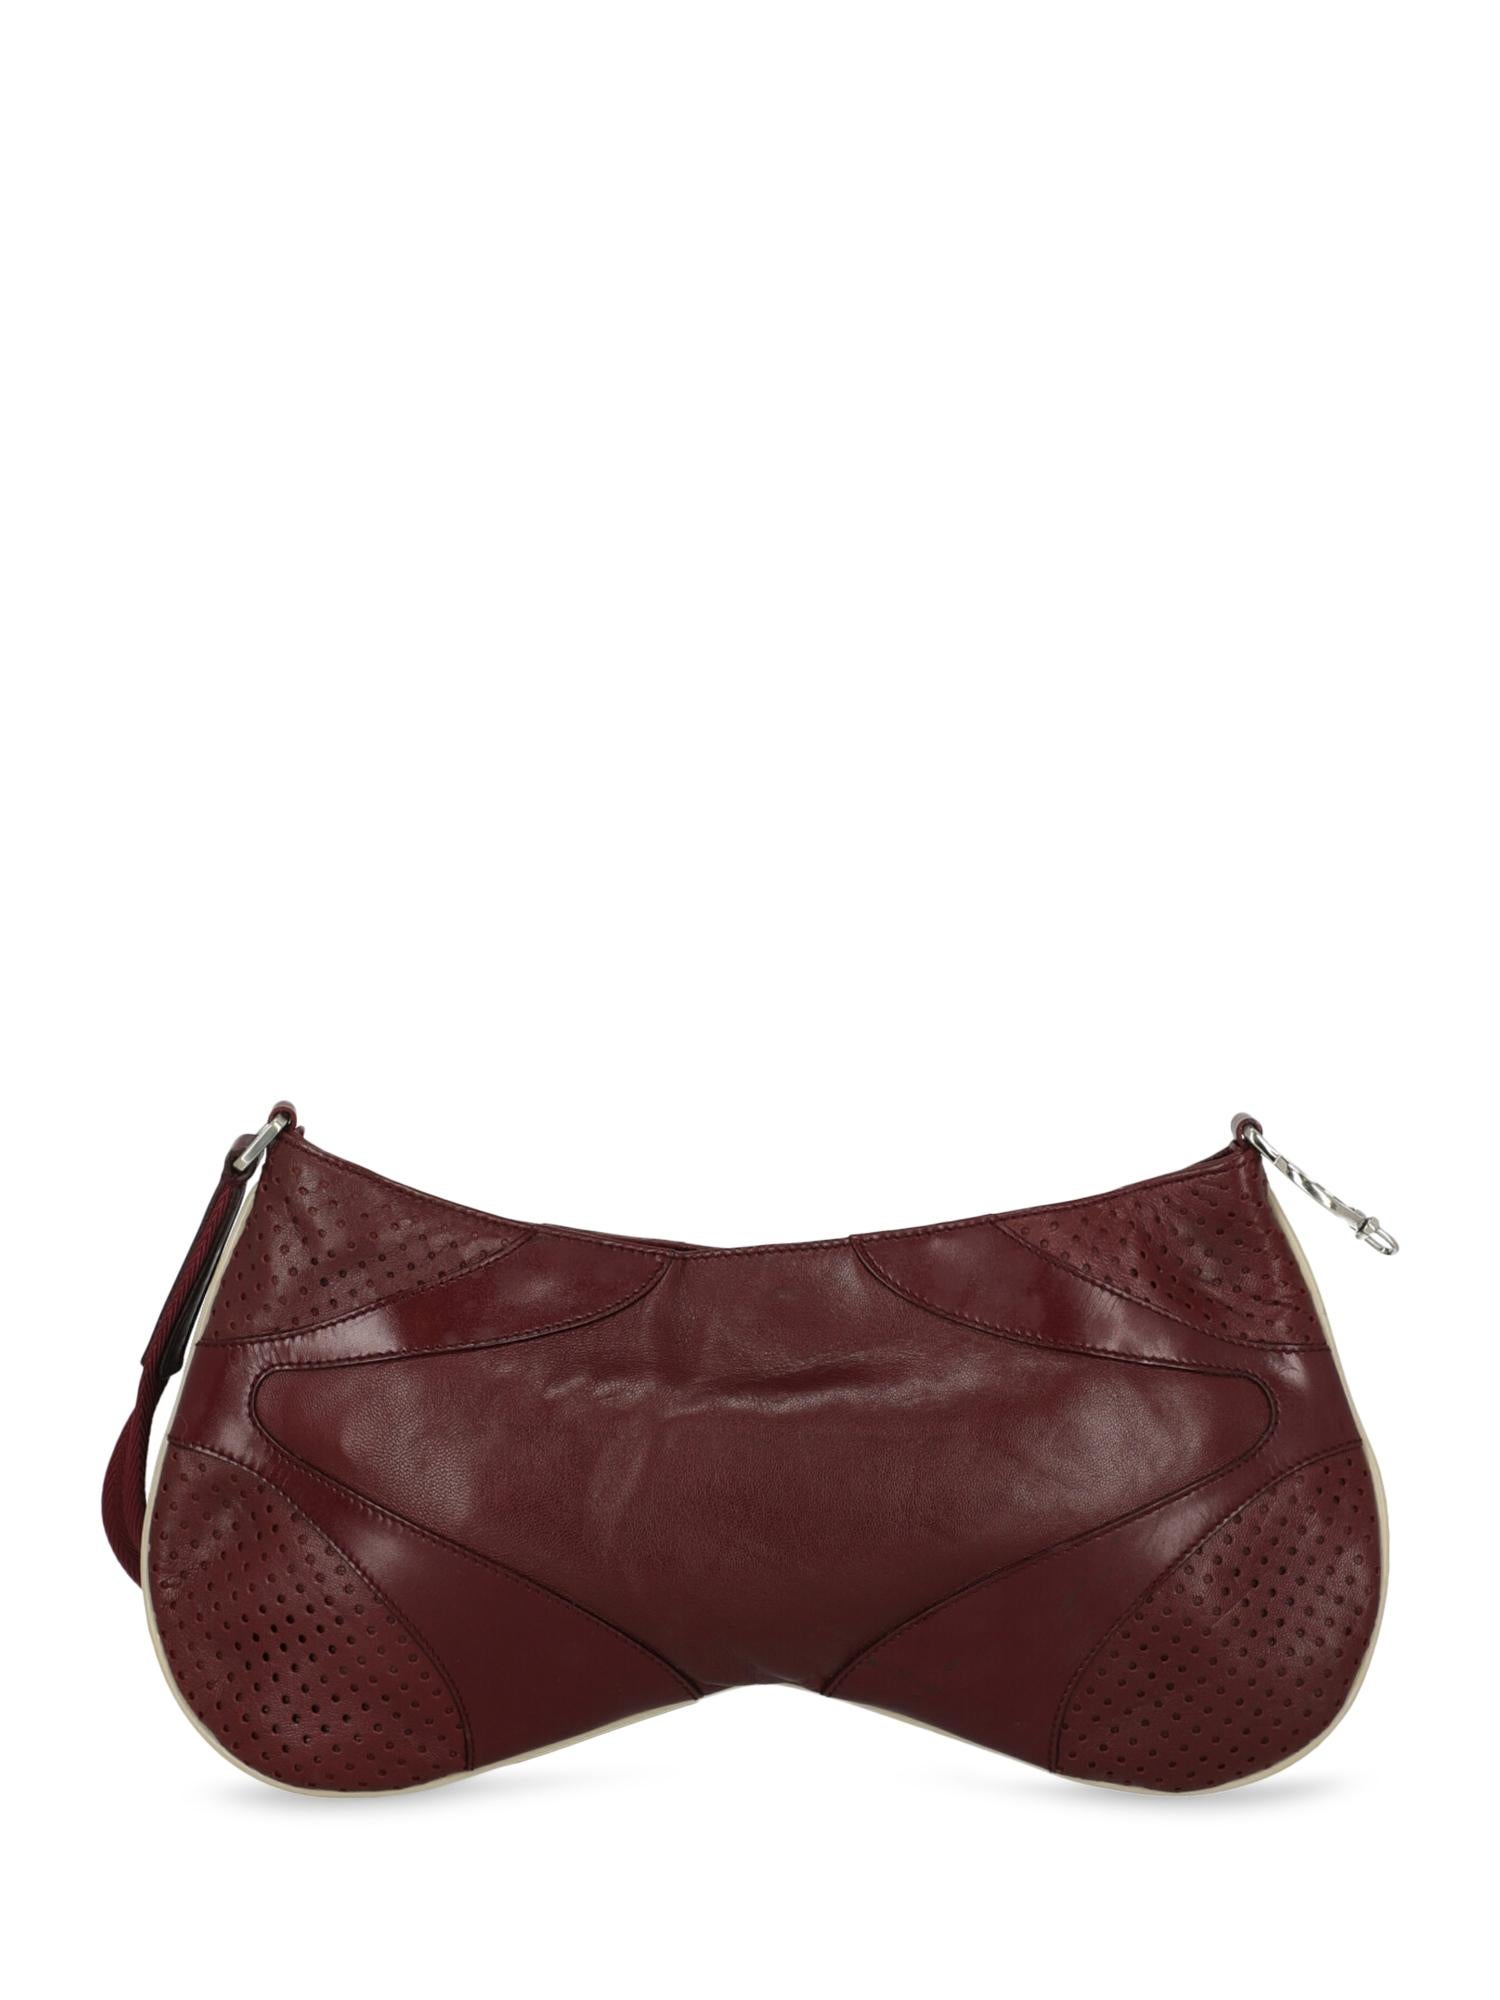 Prada Woman Shoulder bag Burgundy Leather In Fair Condition For Sale In Milan, IT